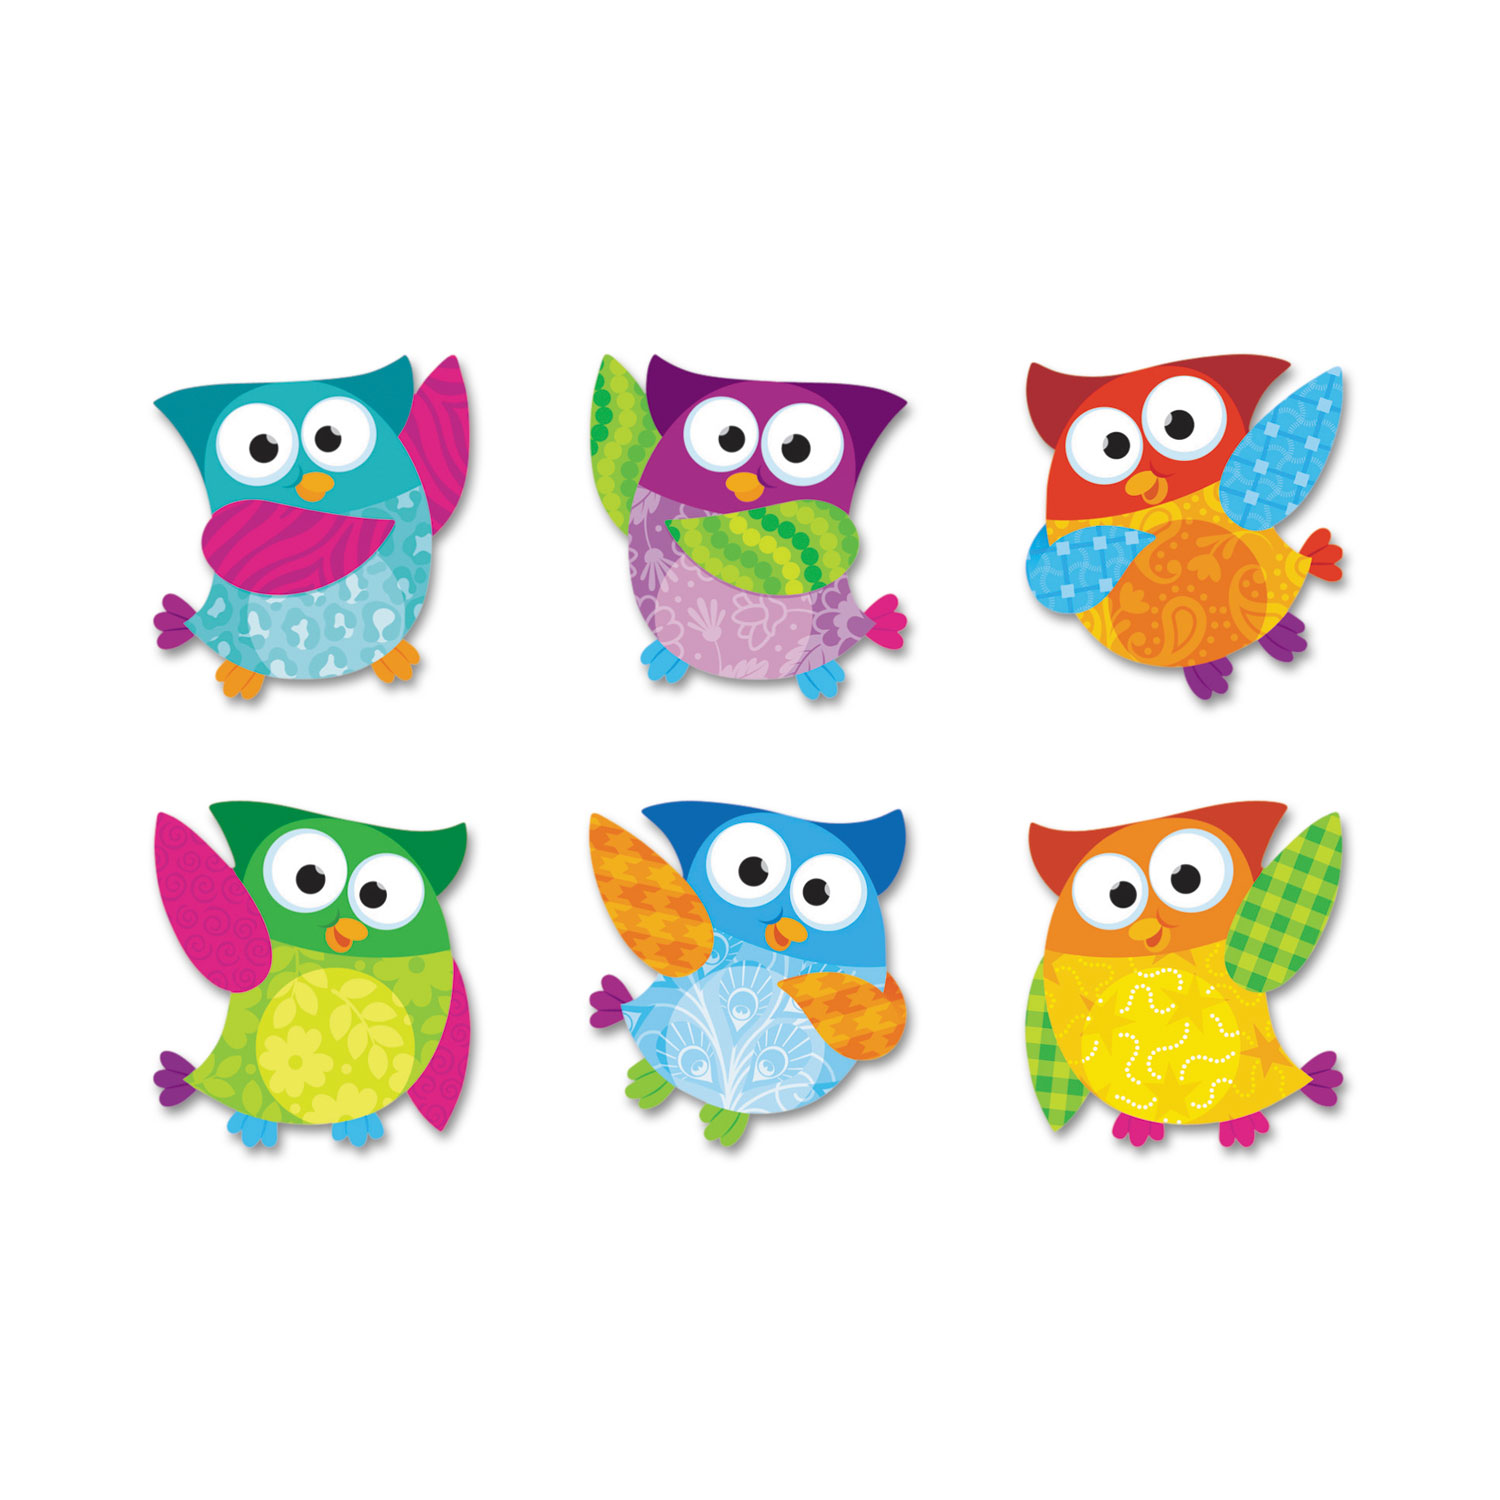 Owl-Stars! Classic Accents Variety Pack, 36 Pieces